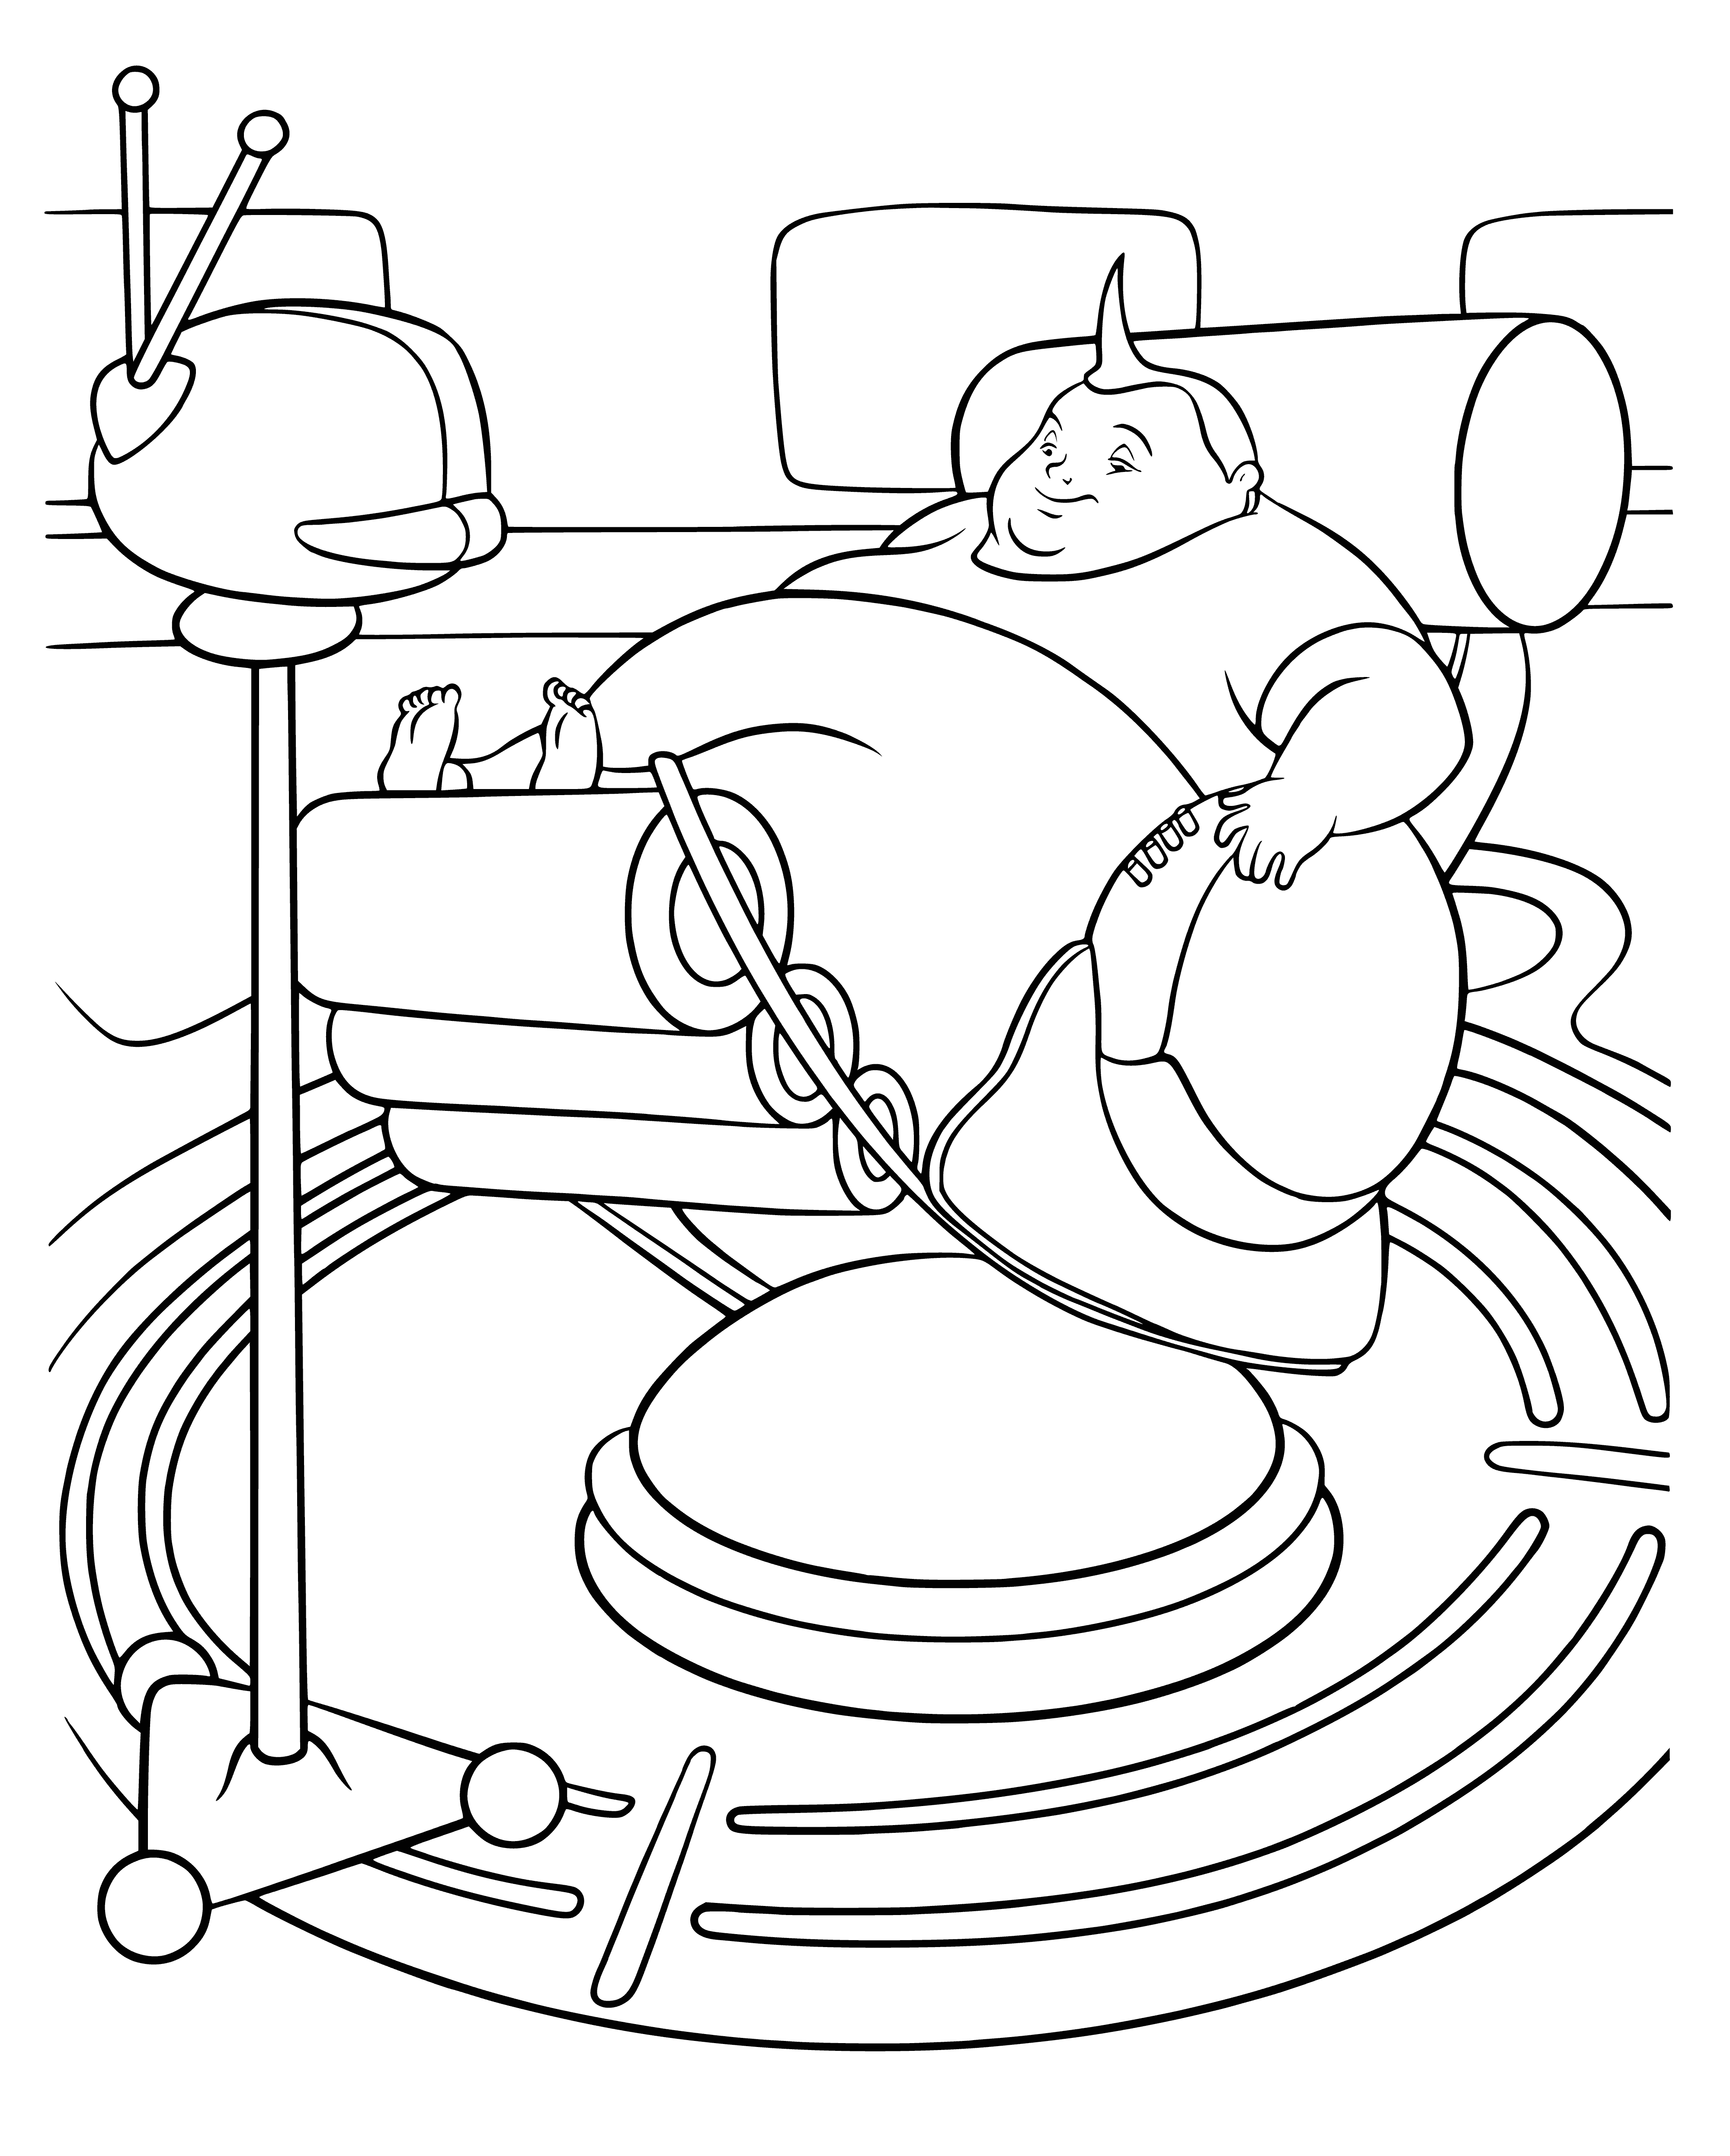 coloring page: A fat boy with a happy expression is sitting in a chair, his big belly touching the ground. #ColorMeHappy